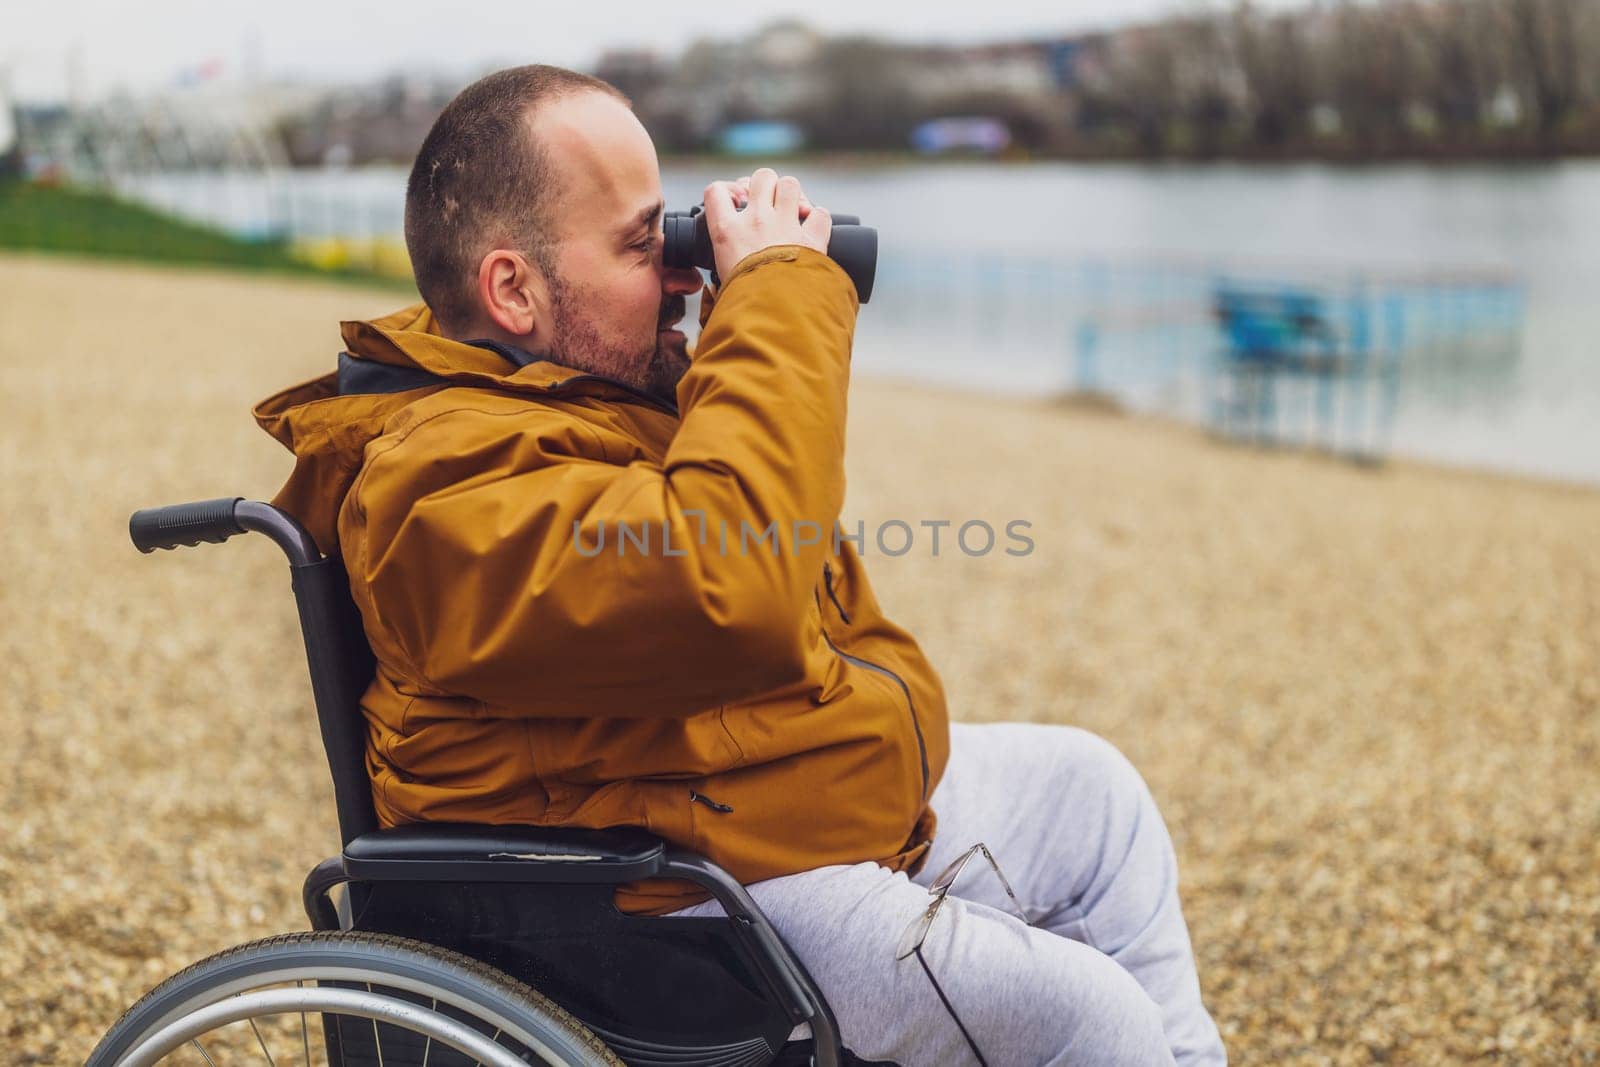 Paraplegic handicapped man in wheelchair is using binoculars outdoor. He is watching nature by the lake.